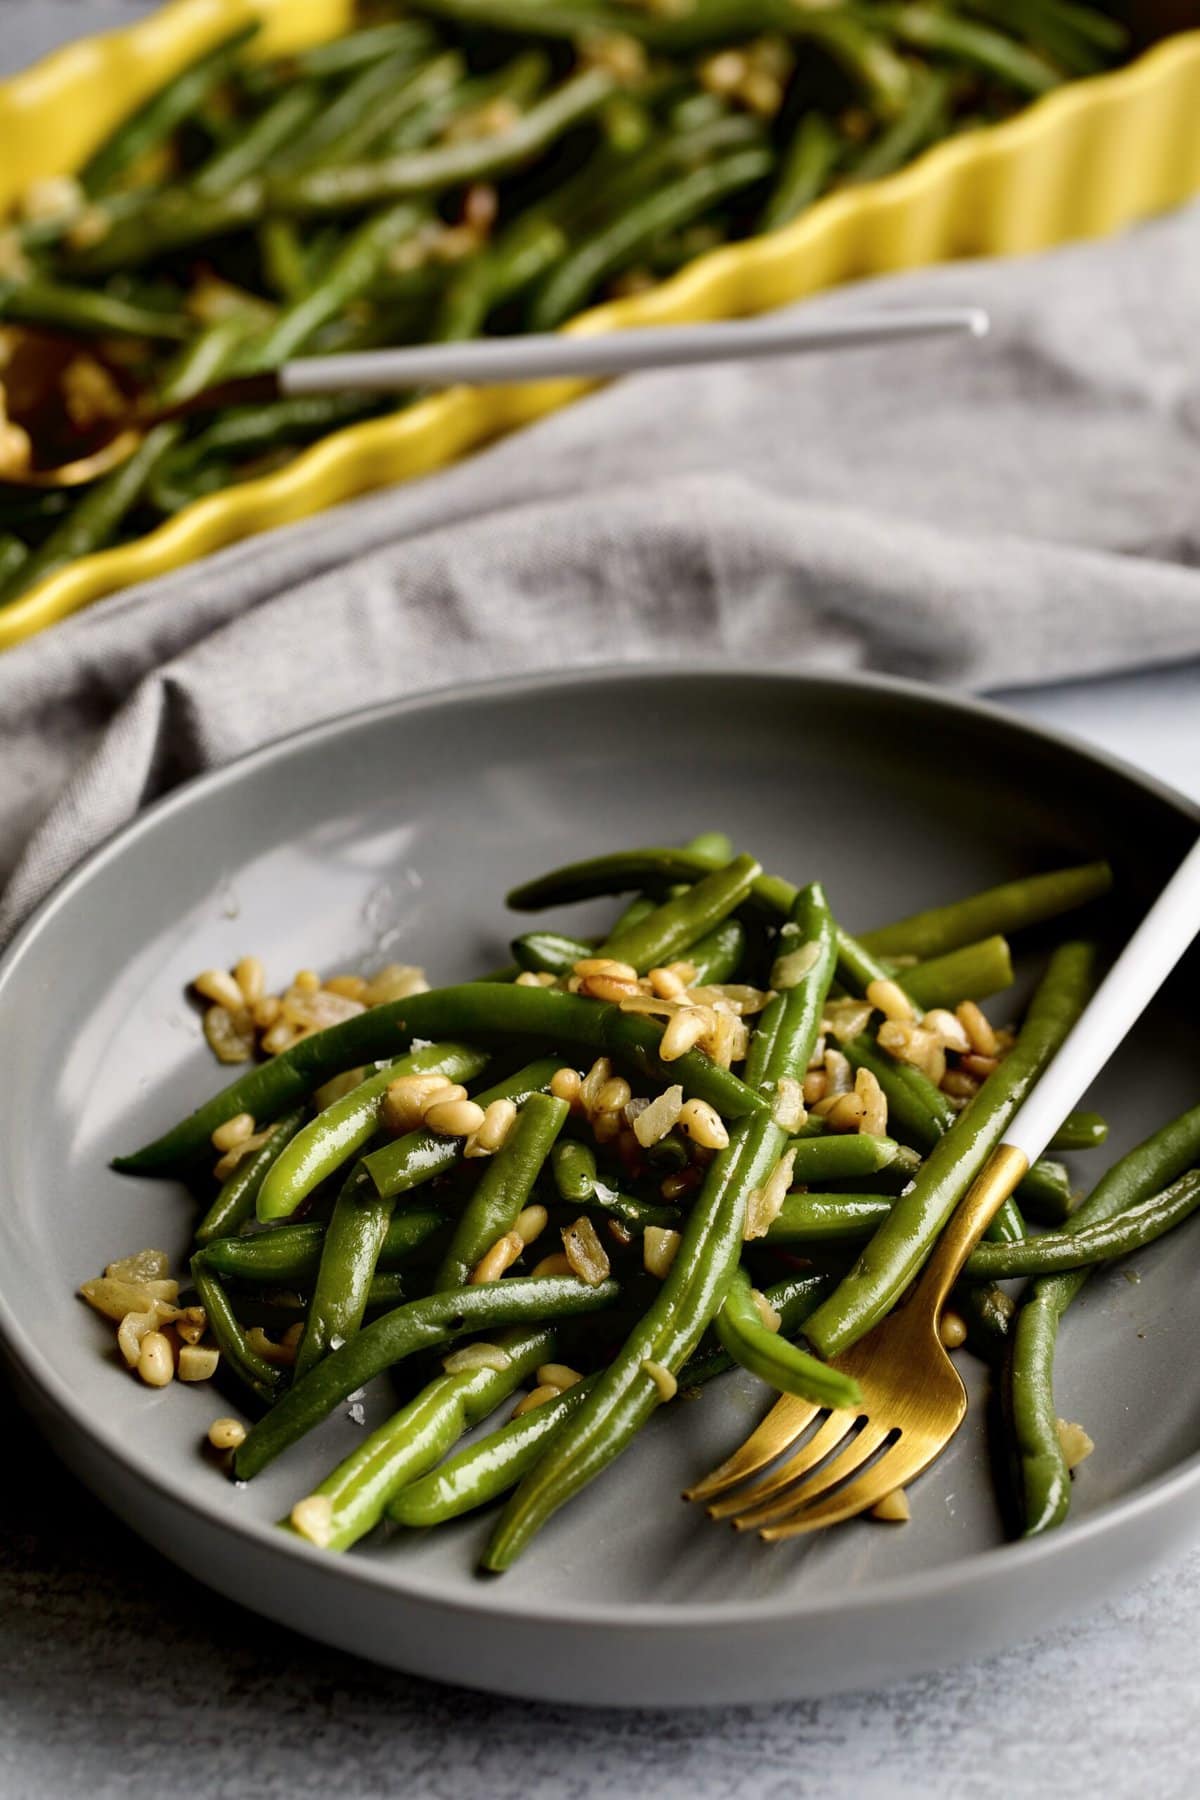 Sautéed Frozen Green Beans Recipe (Easy) on a grey plate with a fork